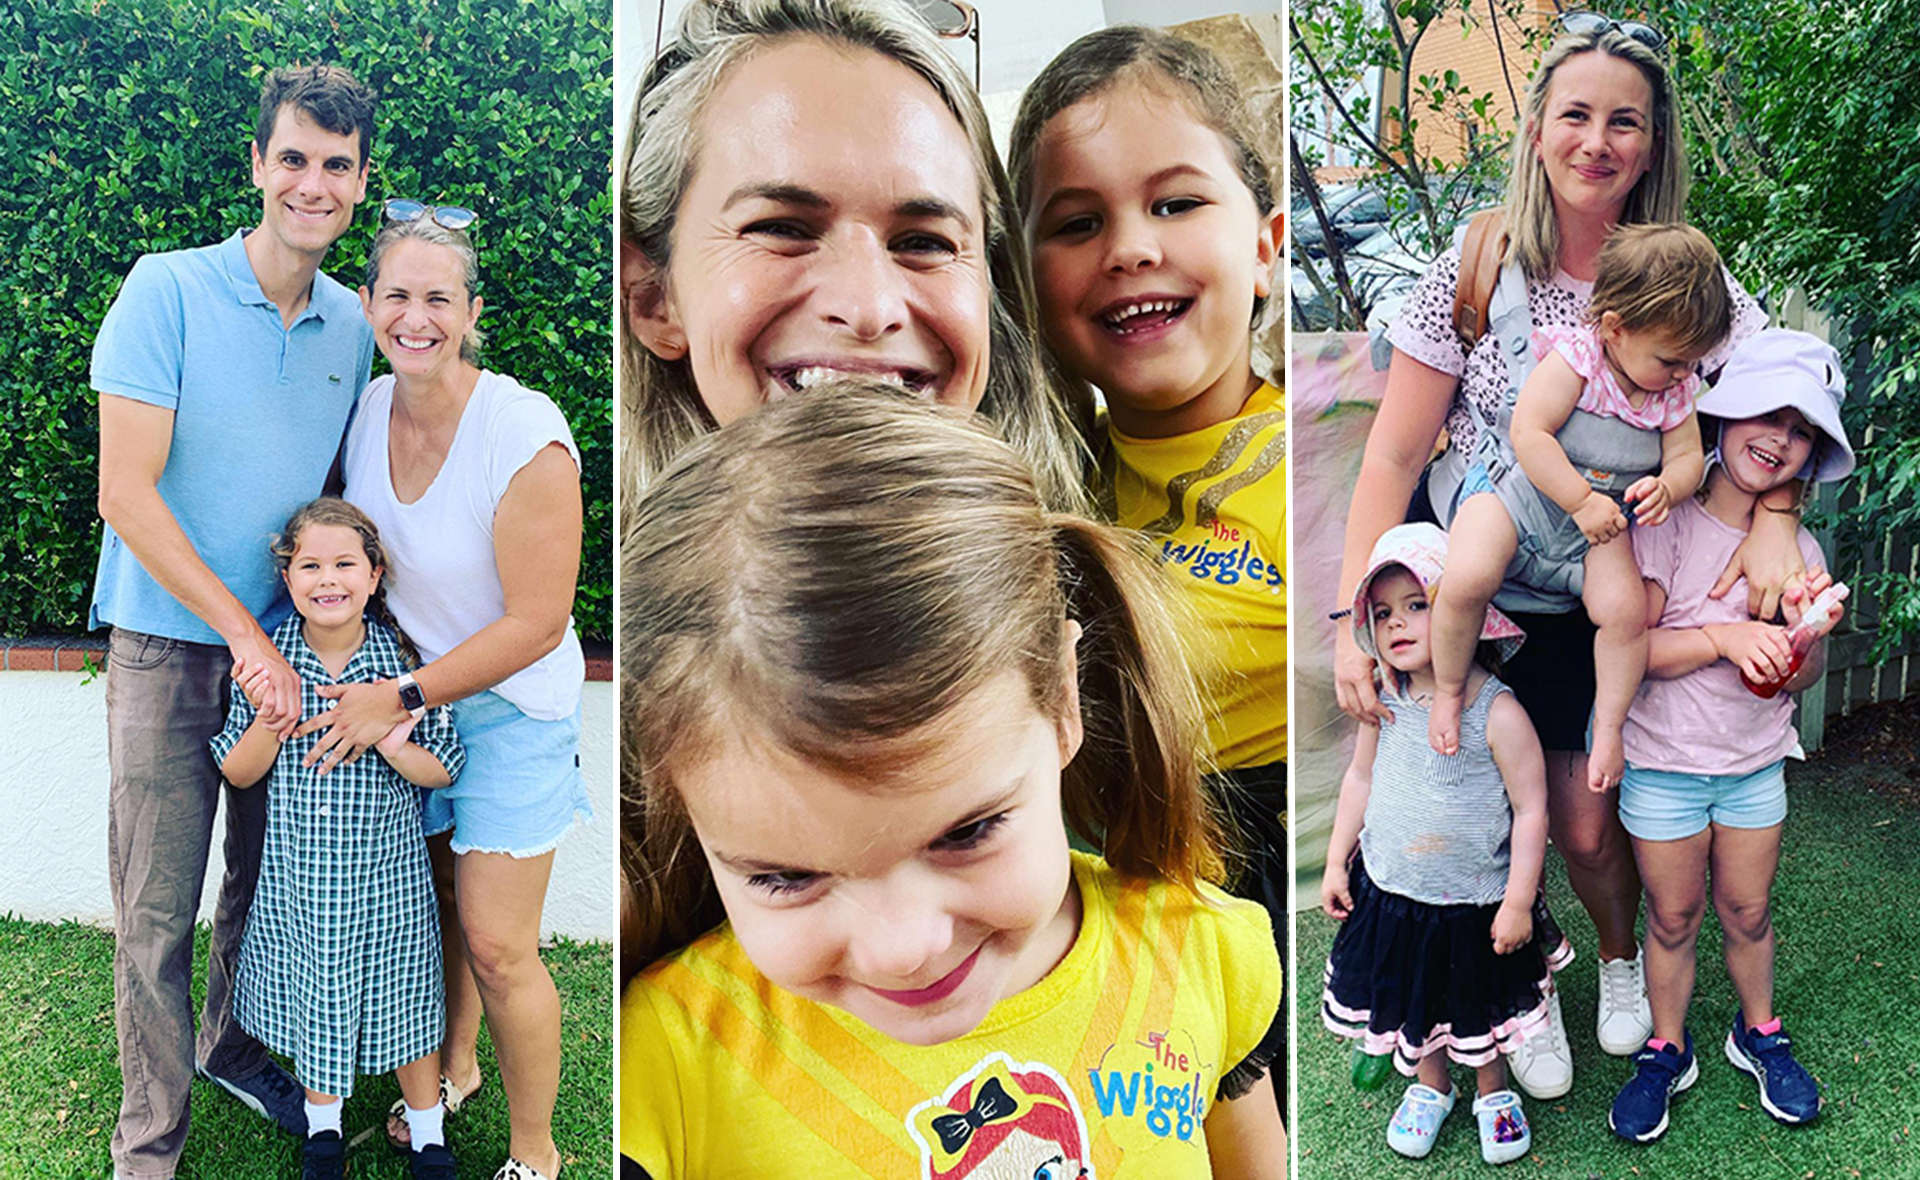 How Libby Trickett battled postnatal depression to become a bona fide supermum to three adorable girls